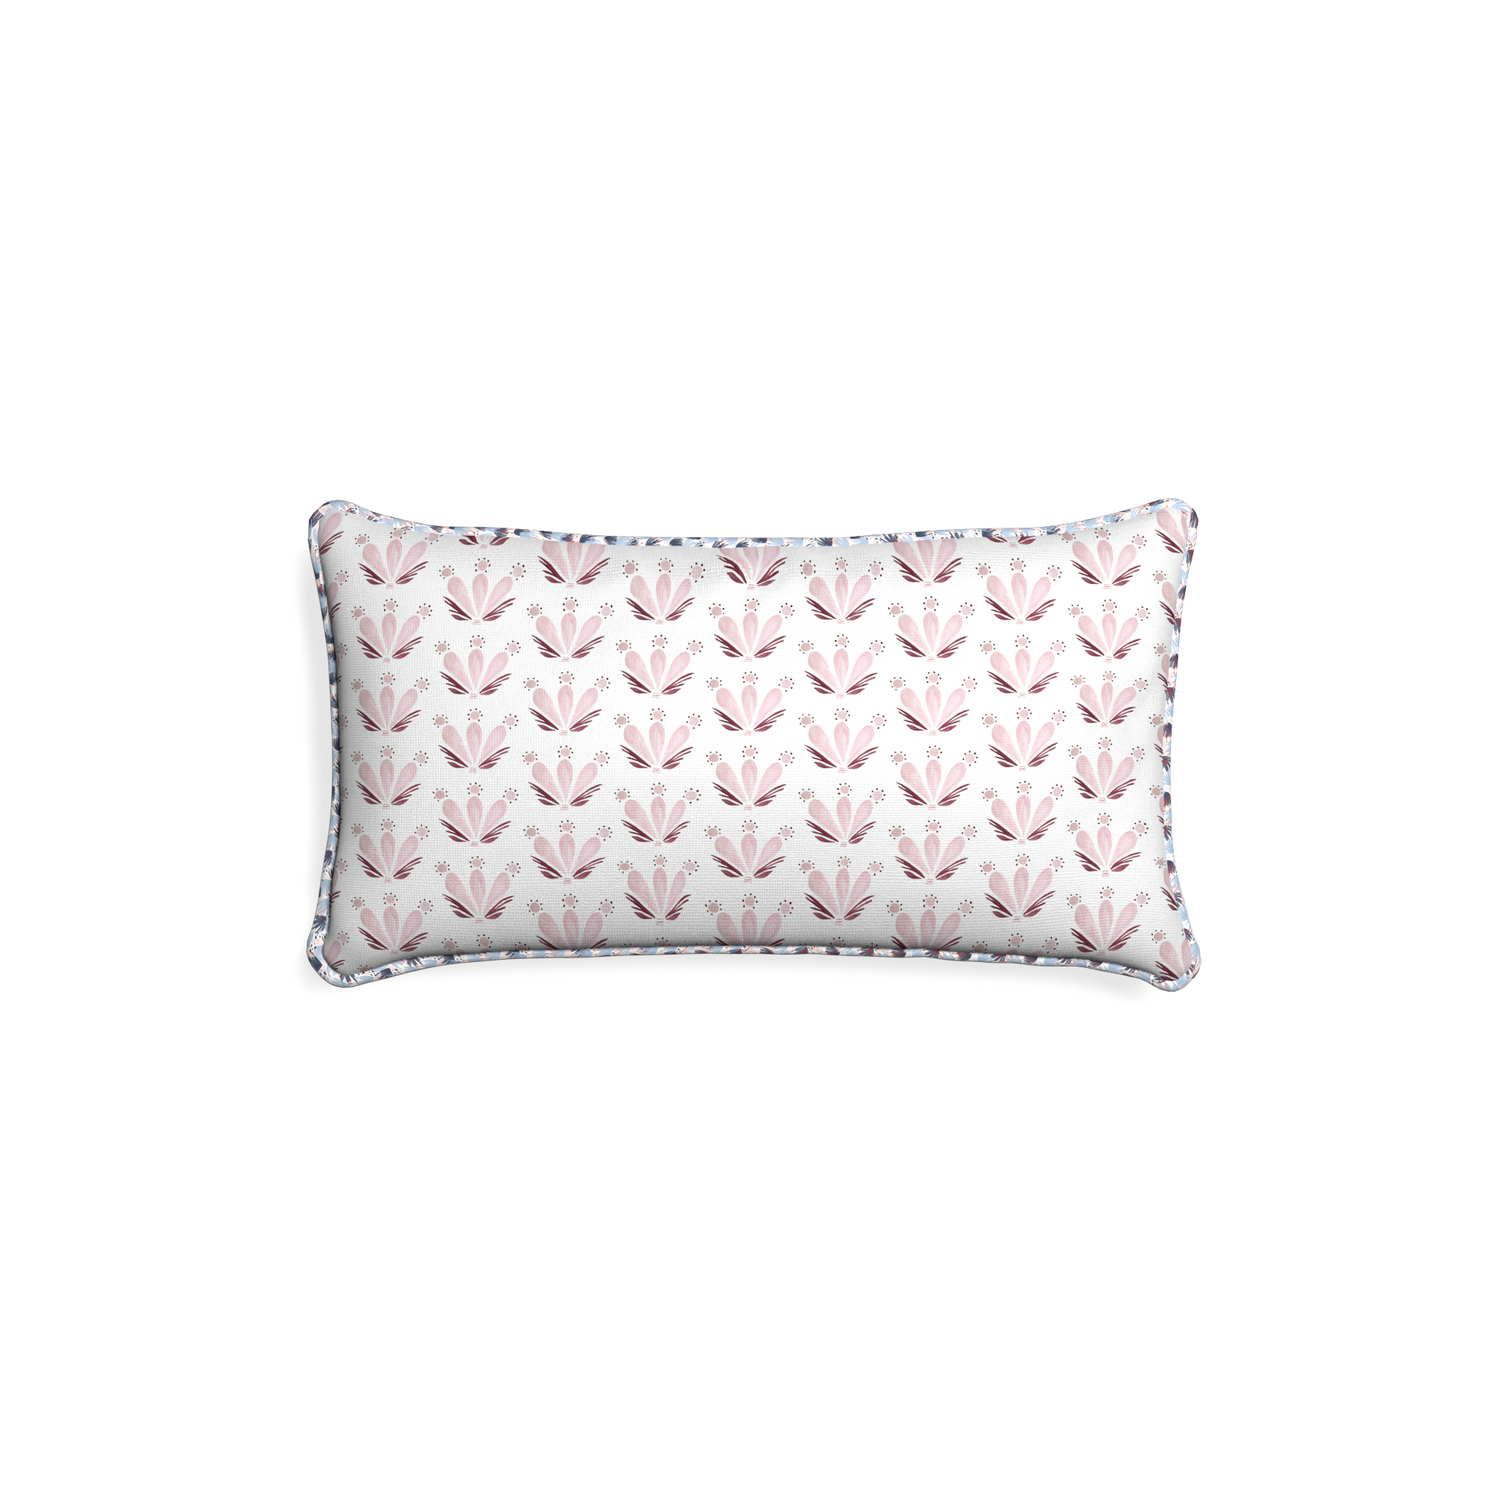 Petite-lumbar serena pink custom pink & burgundy drop repeat floralpillow with e piping on white background